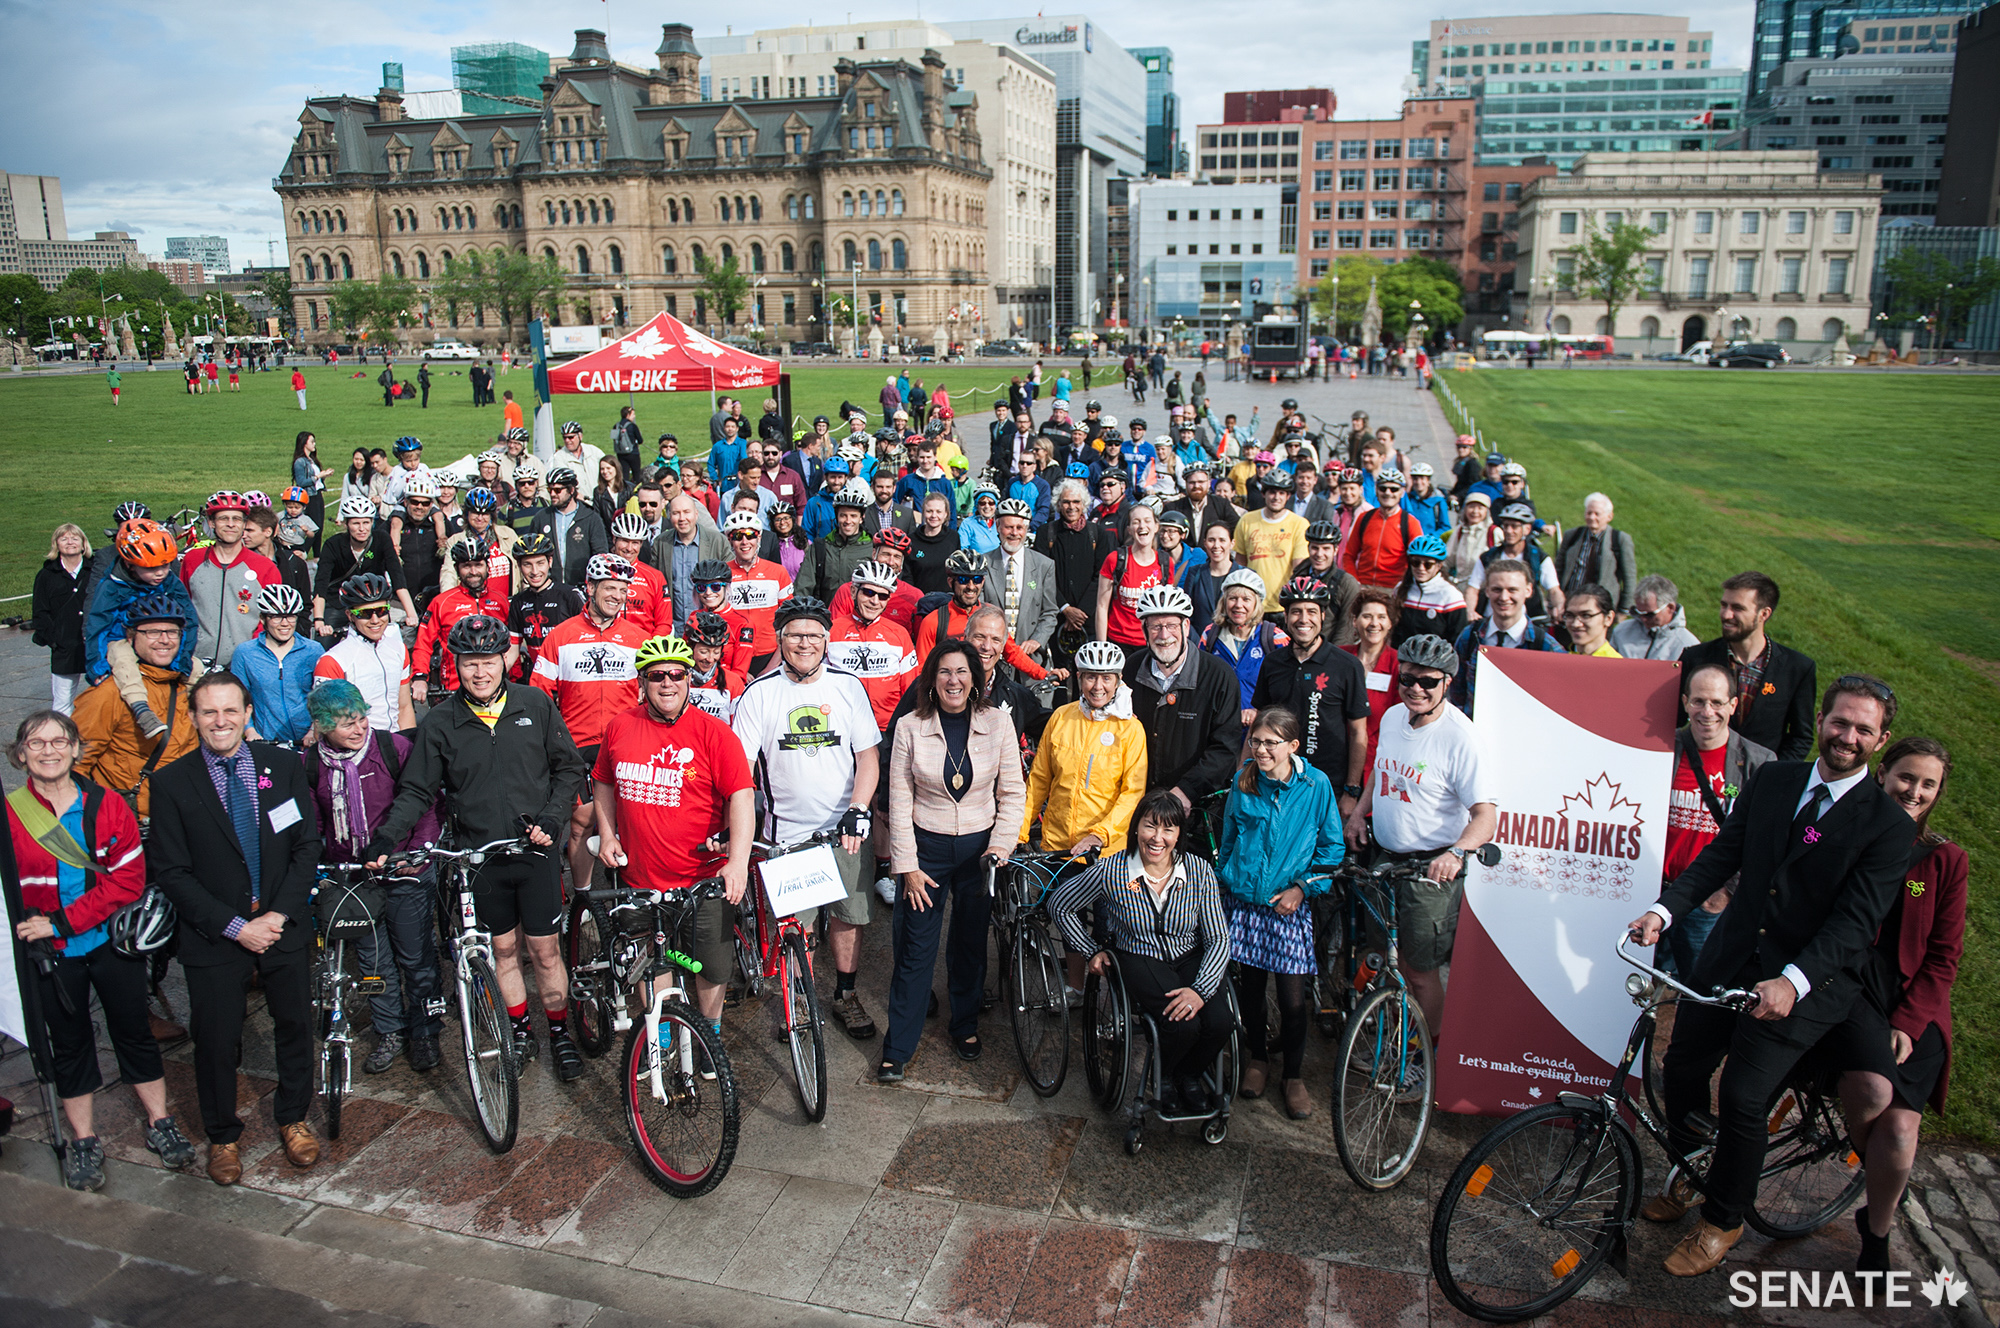 Bike Day on the Hill took place on Thursday, June 1, 2017, starting at the steps of Parliament. Participating cyclists gather around Senators Nancy Greene Raine, Chantal Petitclerc and Dennis Patterson.